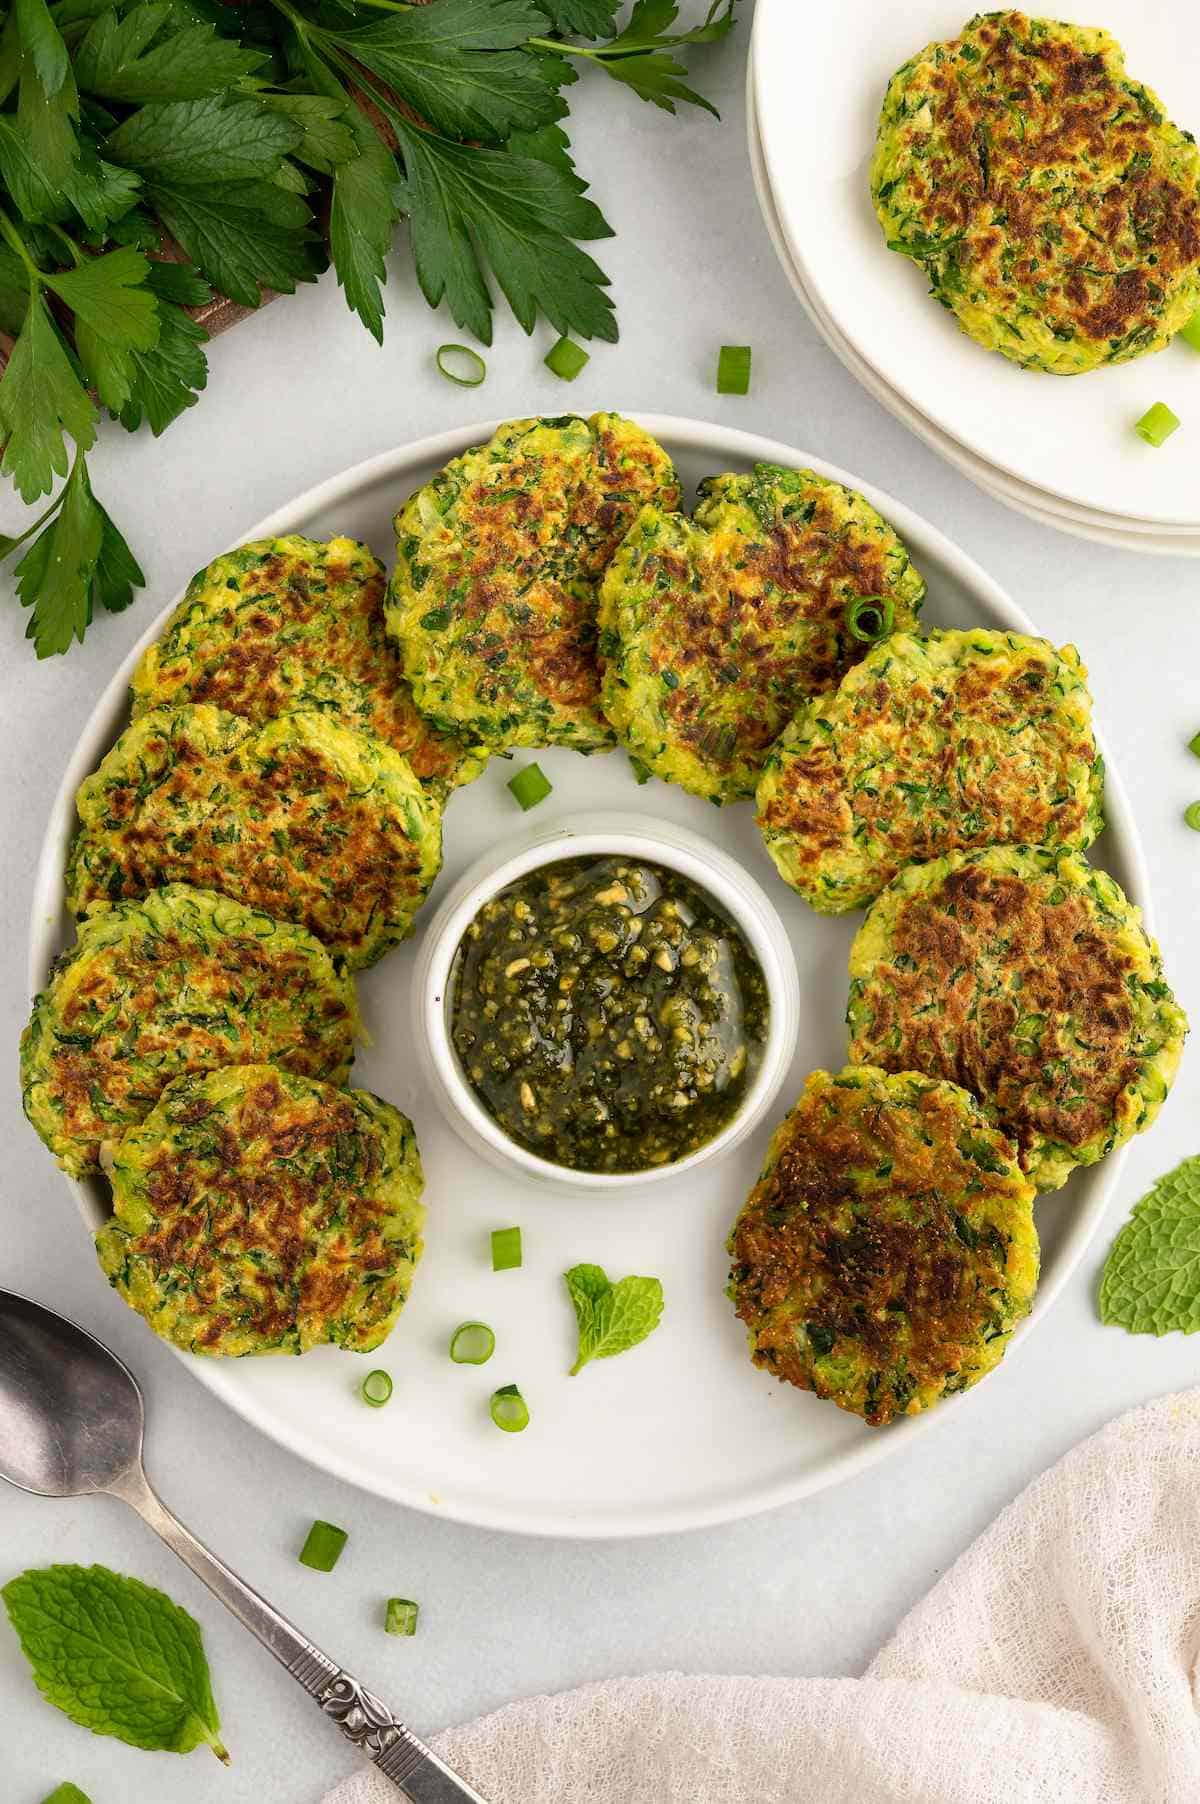 Vegan zucchini fritters placed in a circle around a small bowl of dip on a plate.